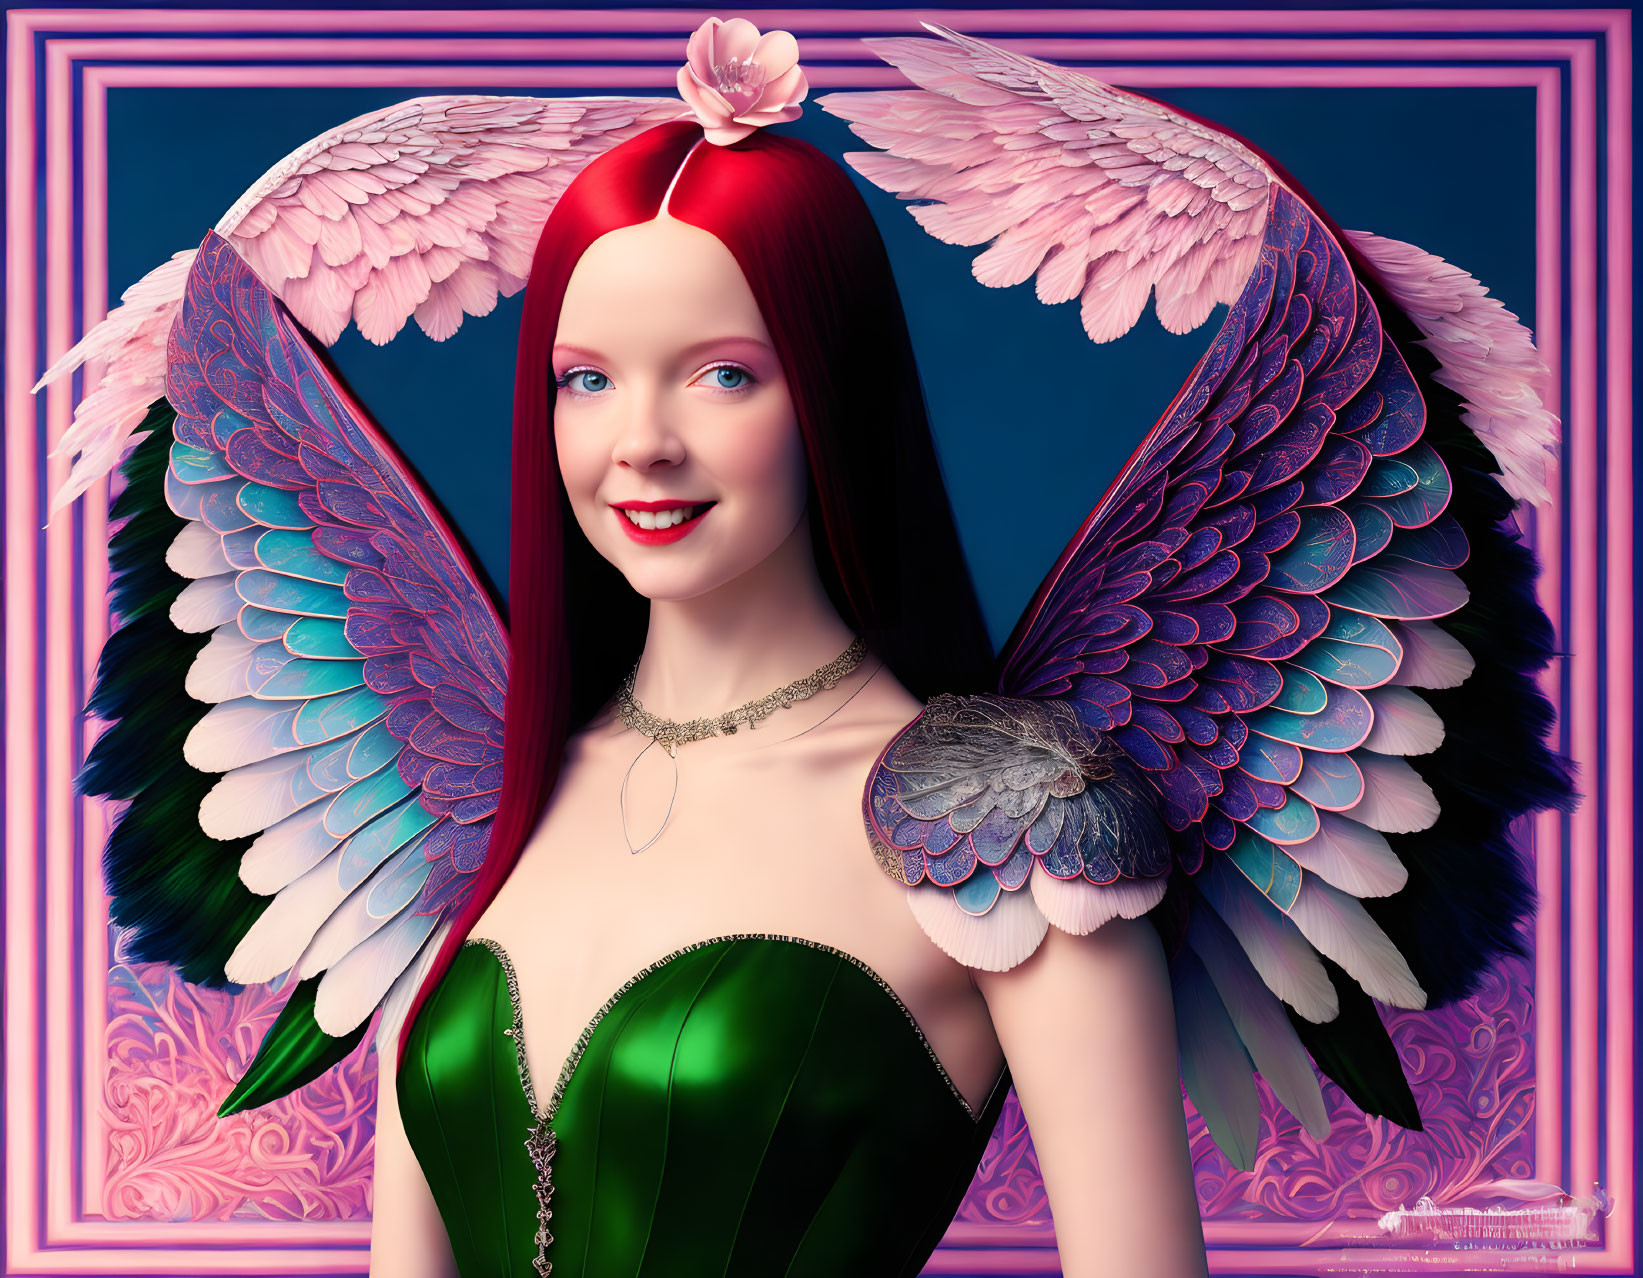 Digital artwork: Woman with red hair, green dress, multicolored angel wings on blue and pink